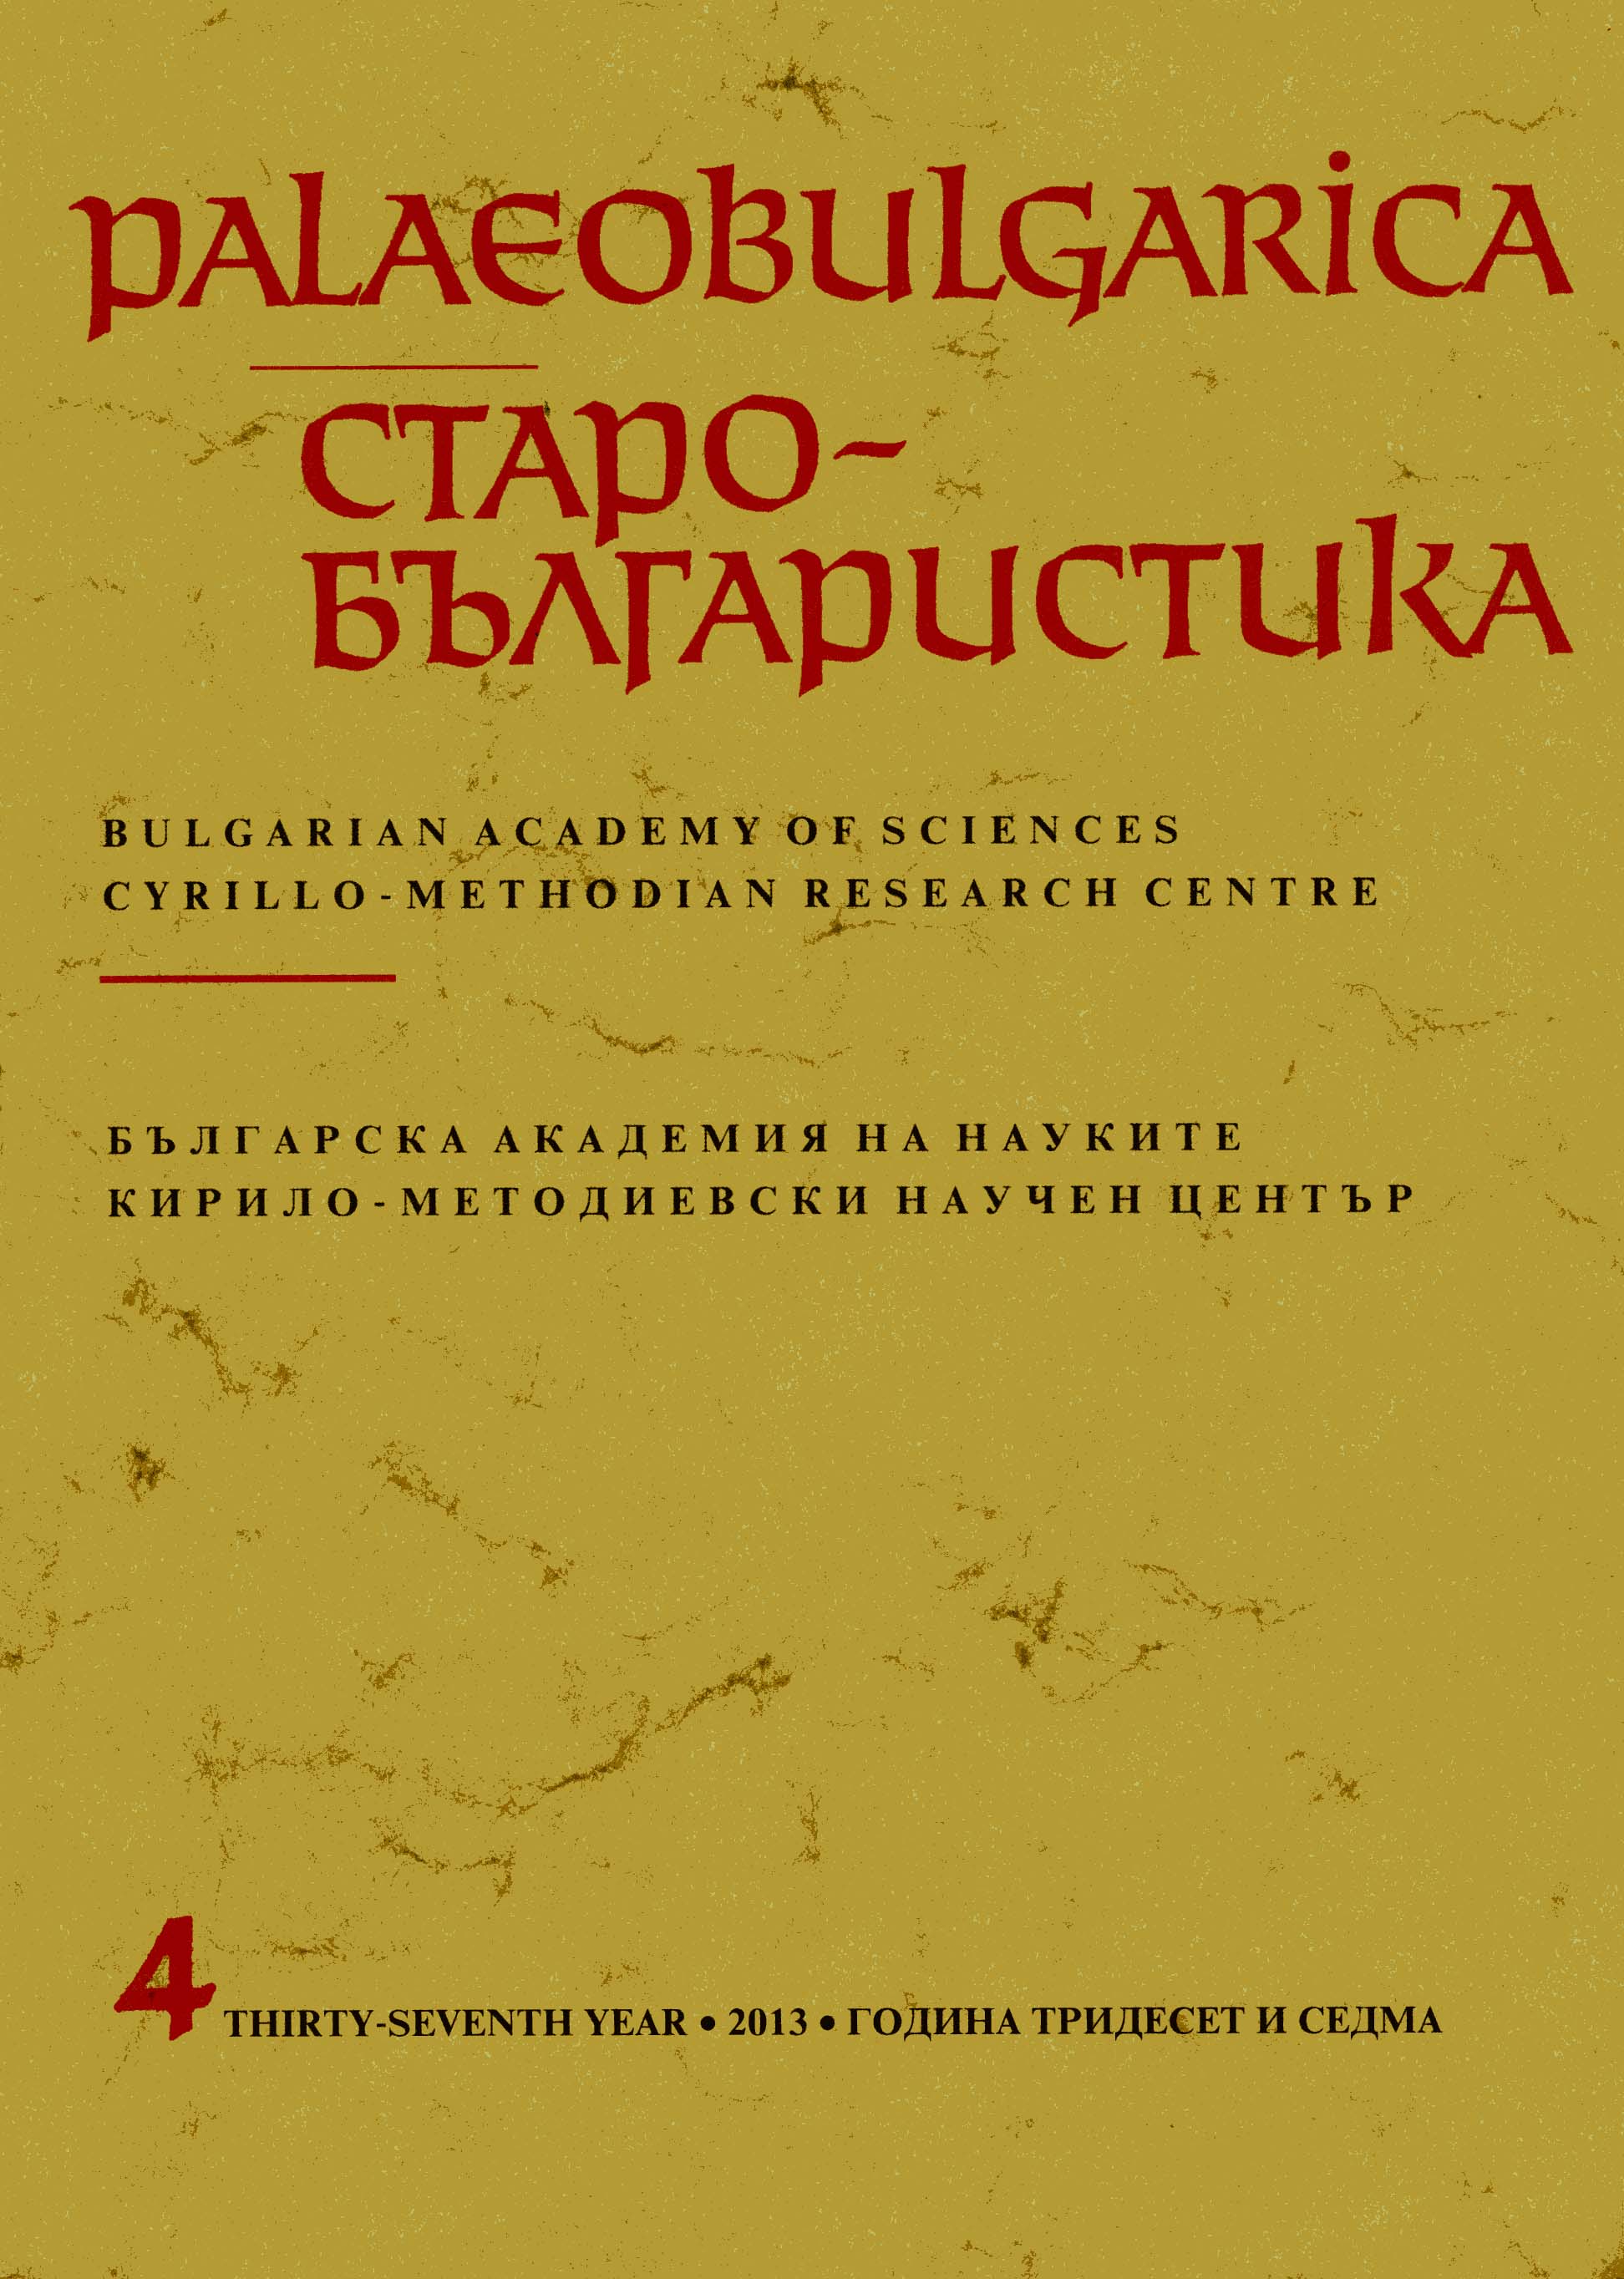 The “Father Neophyte Rilski” Library Cover Image